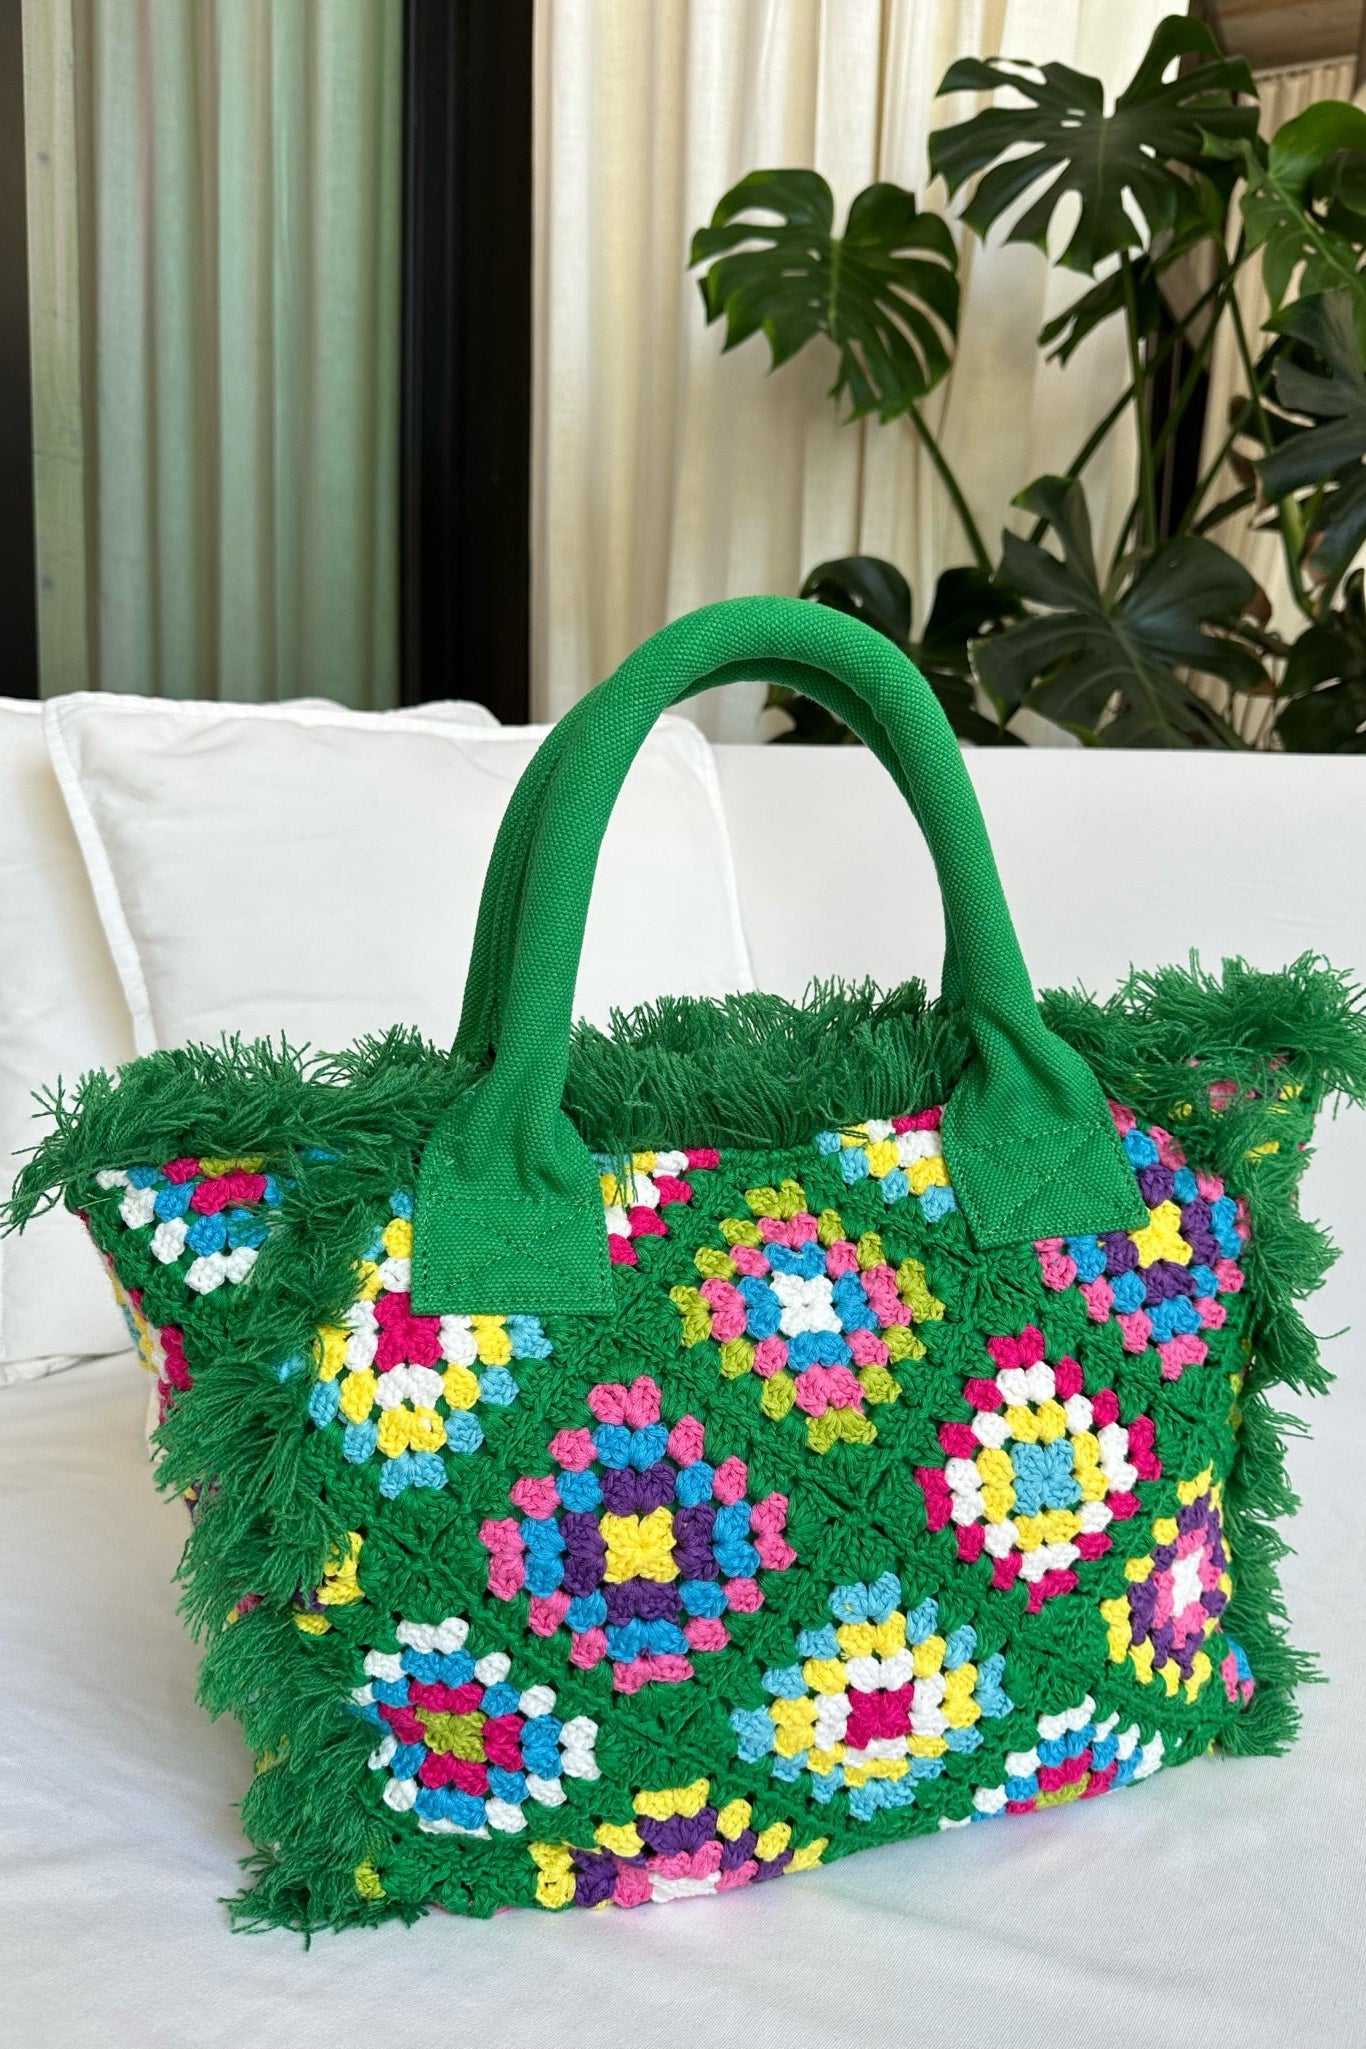 MC2 ST BARTH COLETTE CROCHET BAG IN GREEN FLORAL PATCH